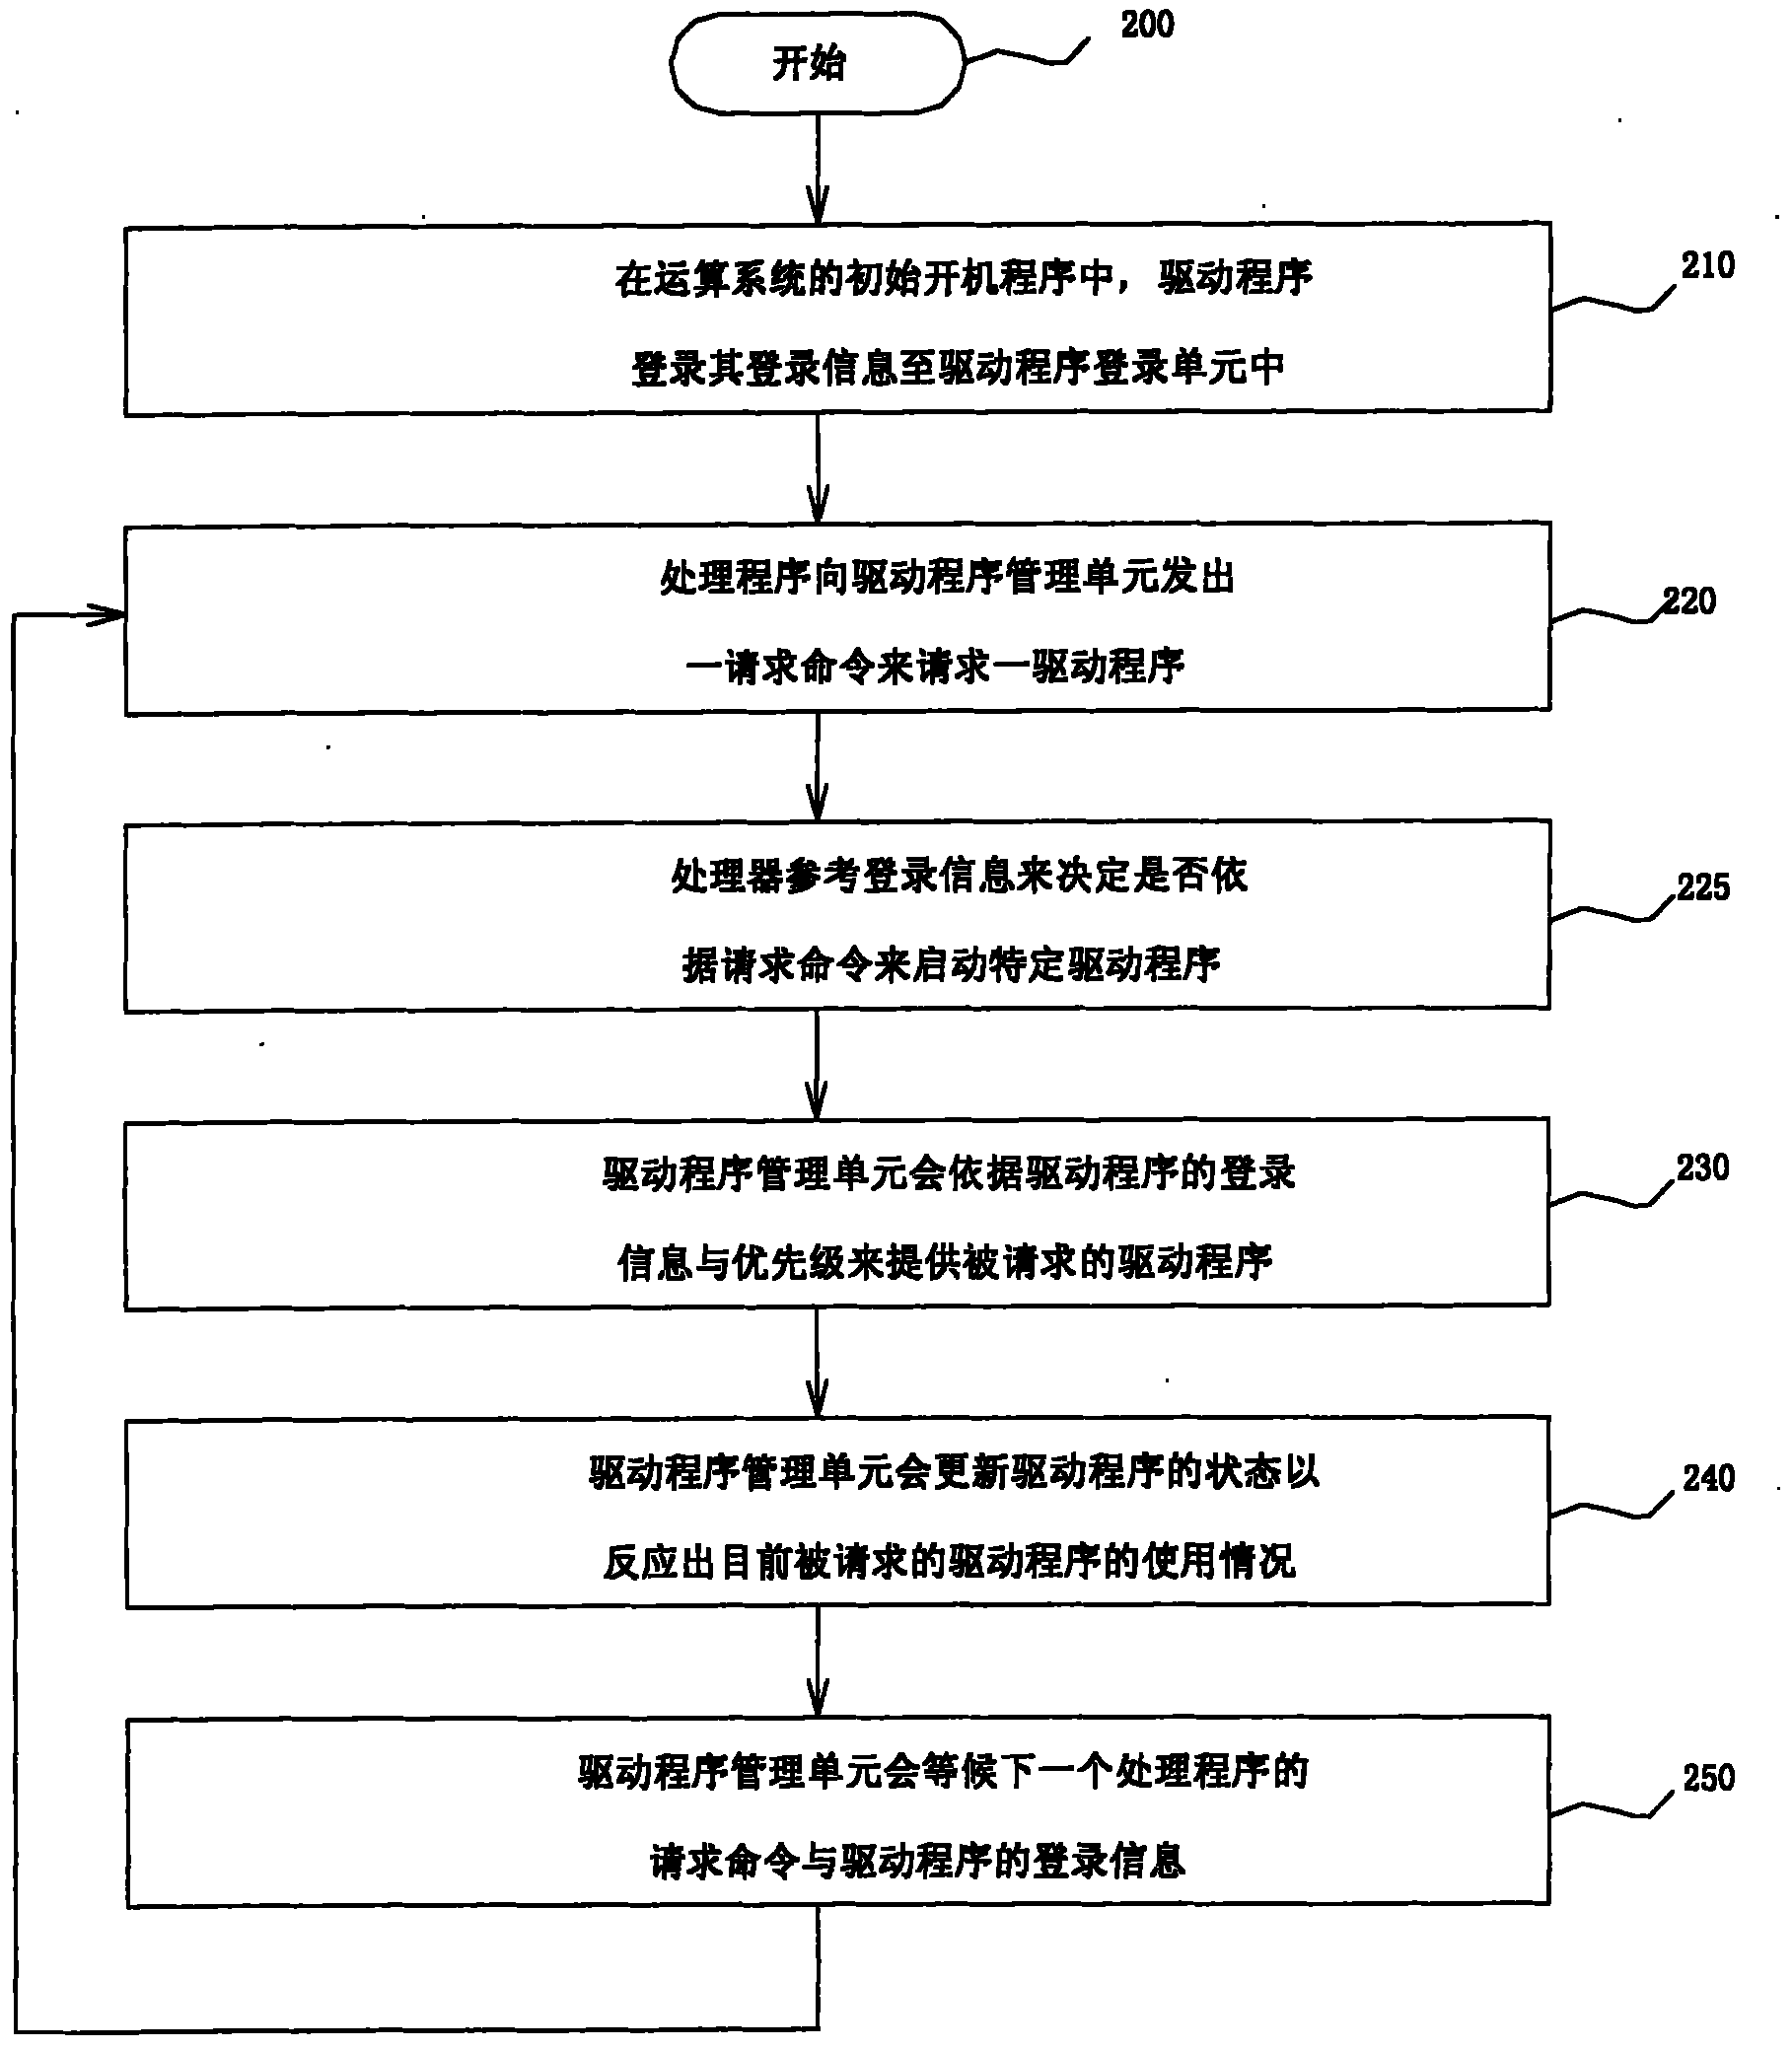 Resource managing method and device for managing drivers